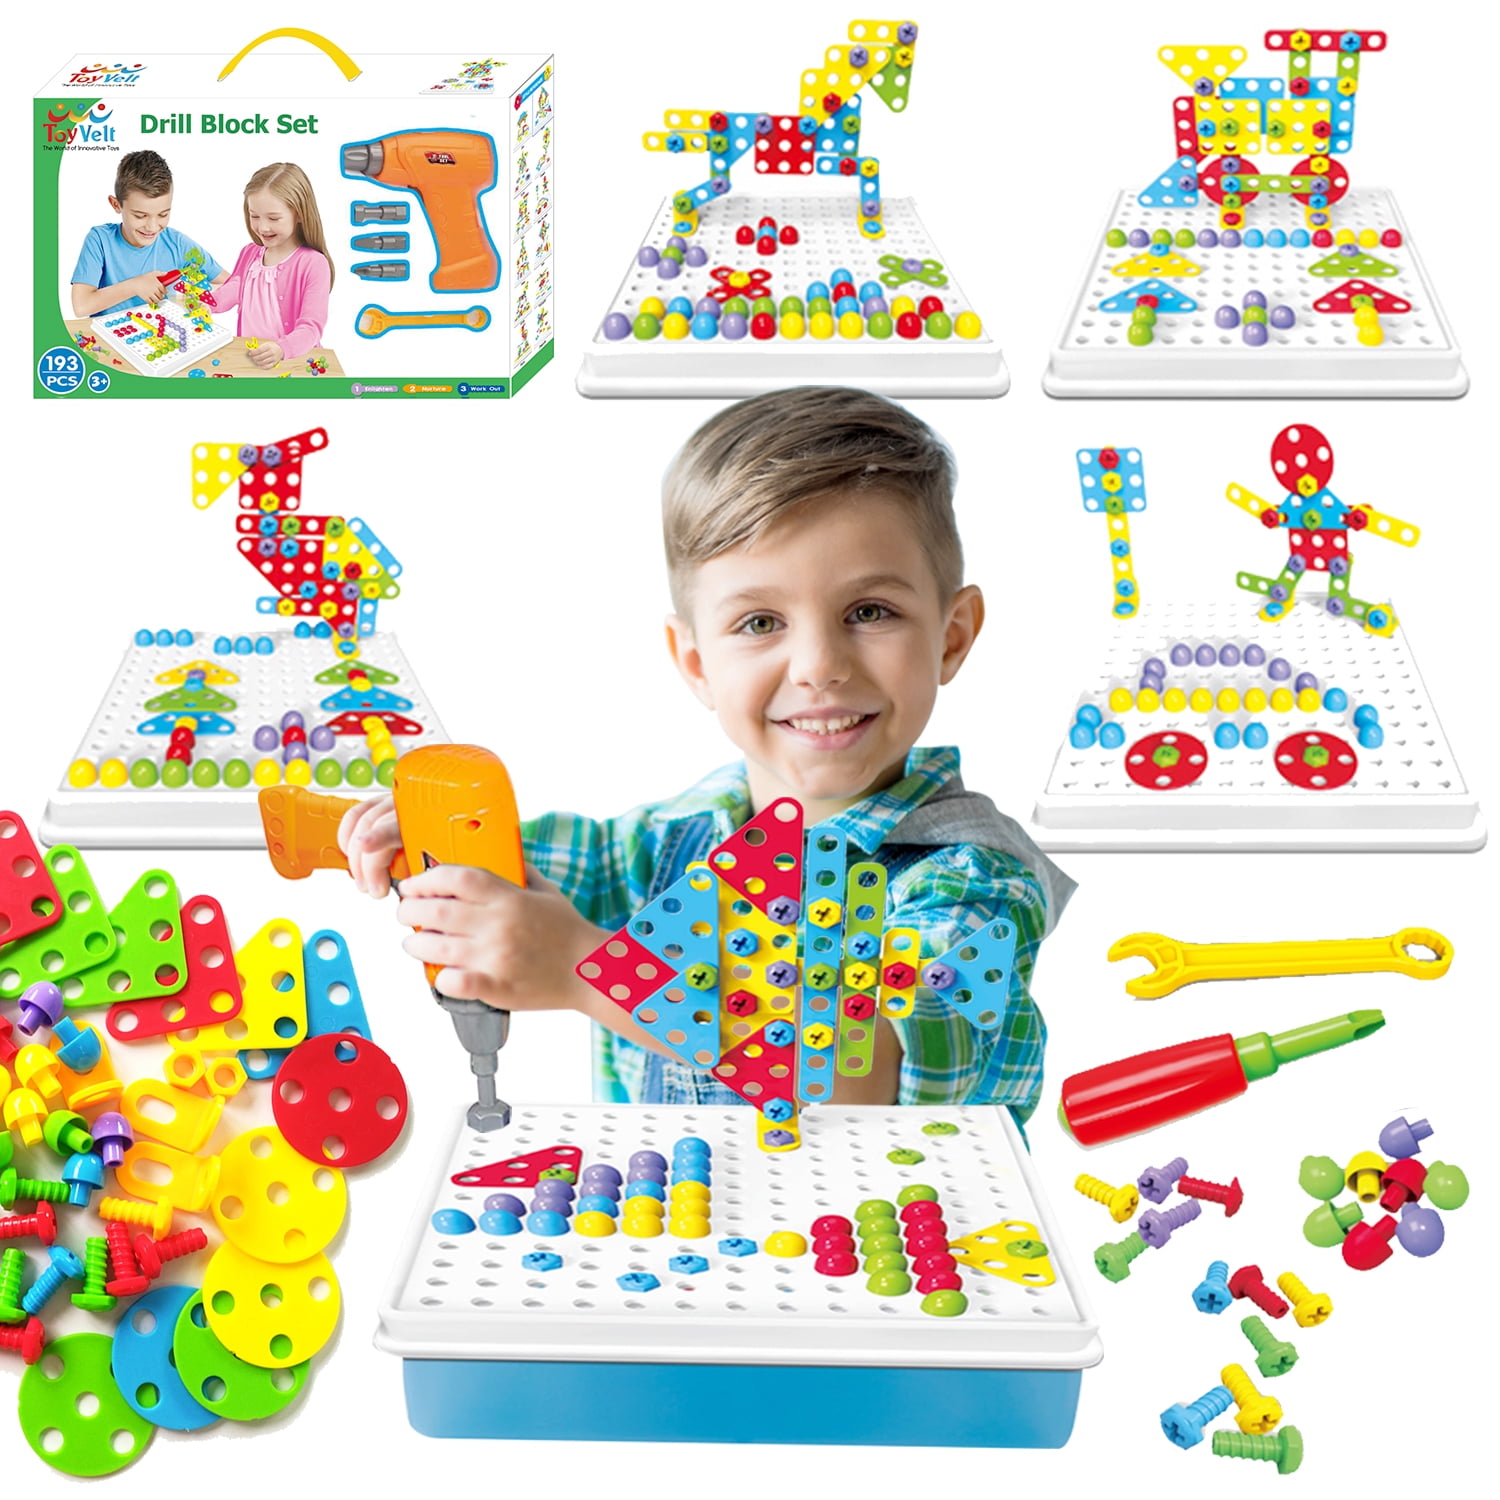 DIY Educational Puzzles with Storage Box for Boys and Girls HAPTIME STEM Learning Toys Construction Engineering Building Block Games with Toy Drill & Screw Driver Tool Set 181 Drill Puzzles 